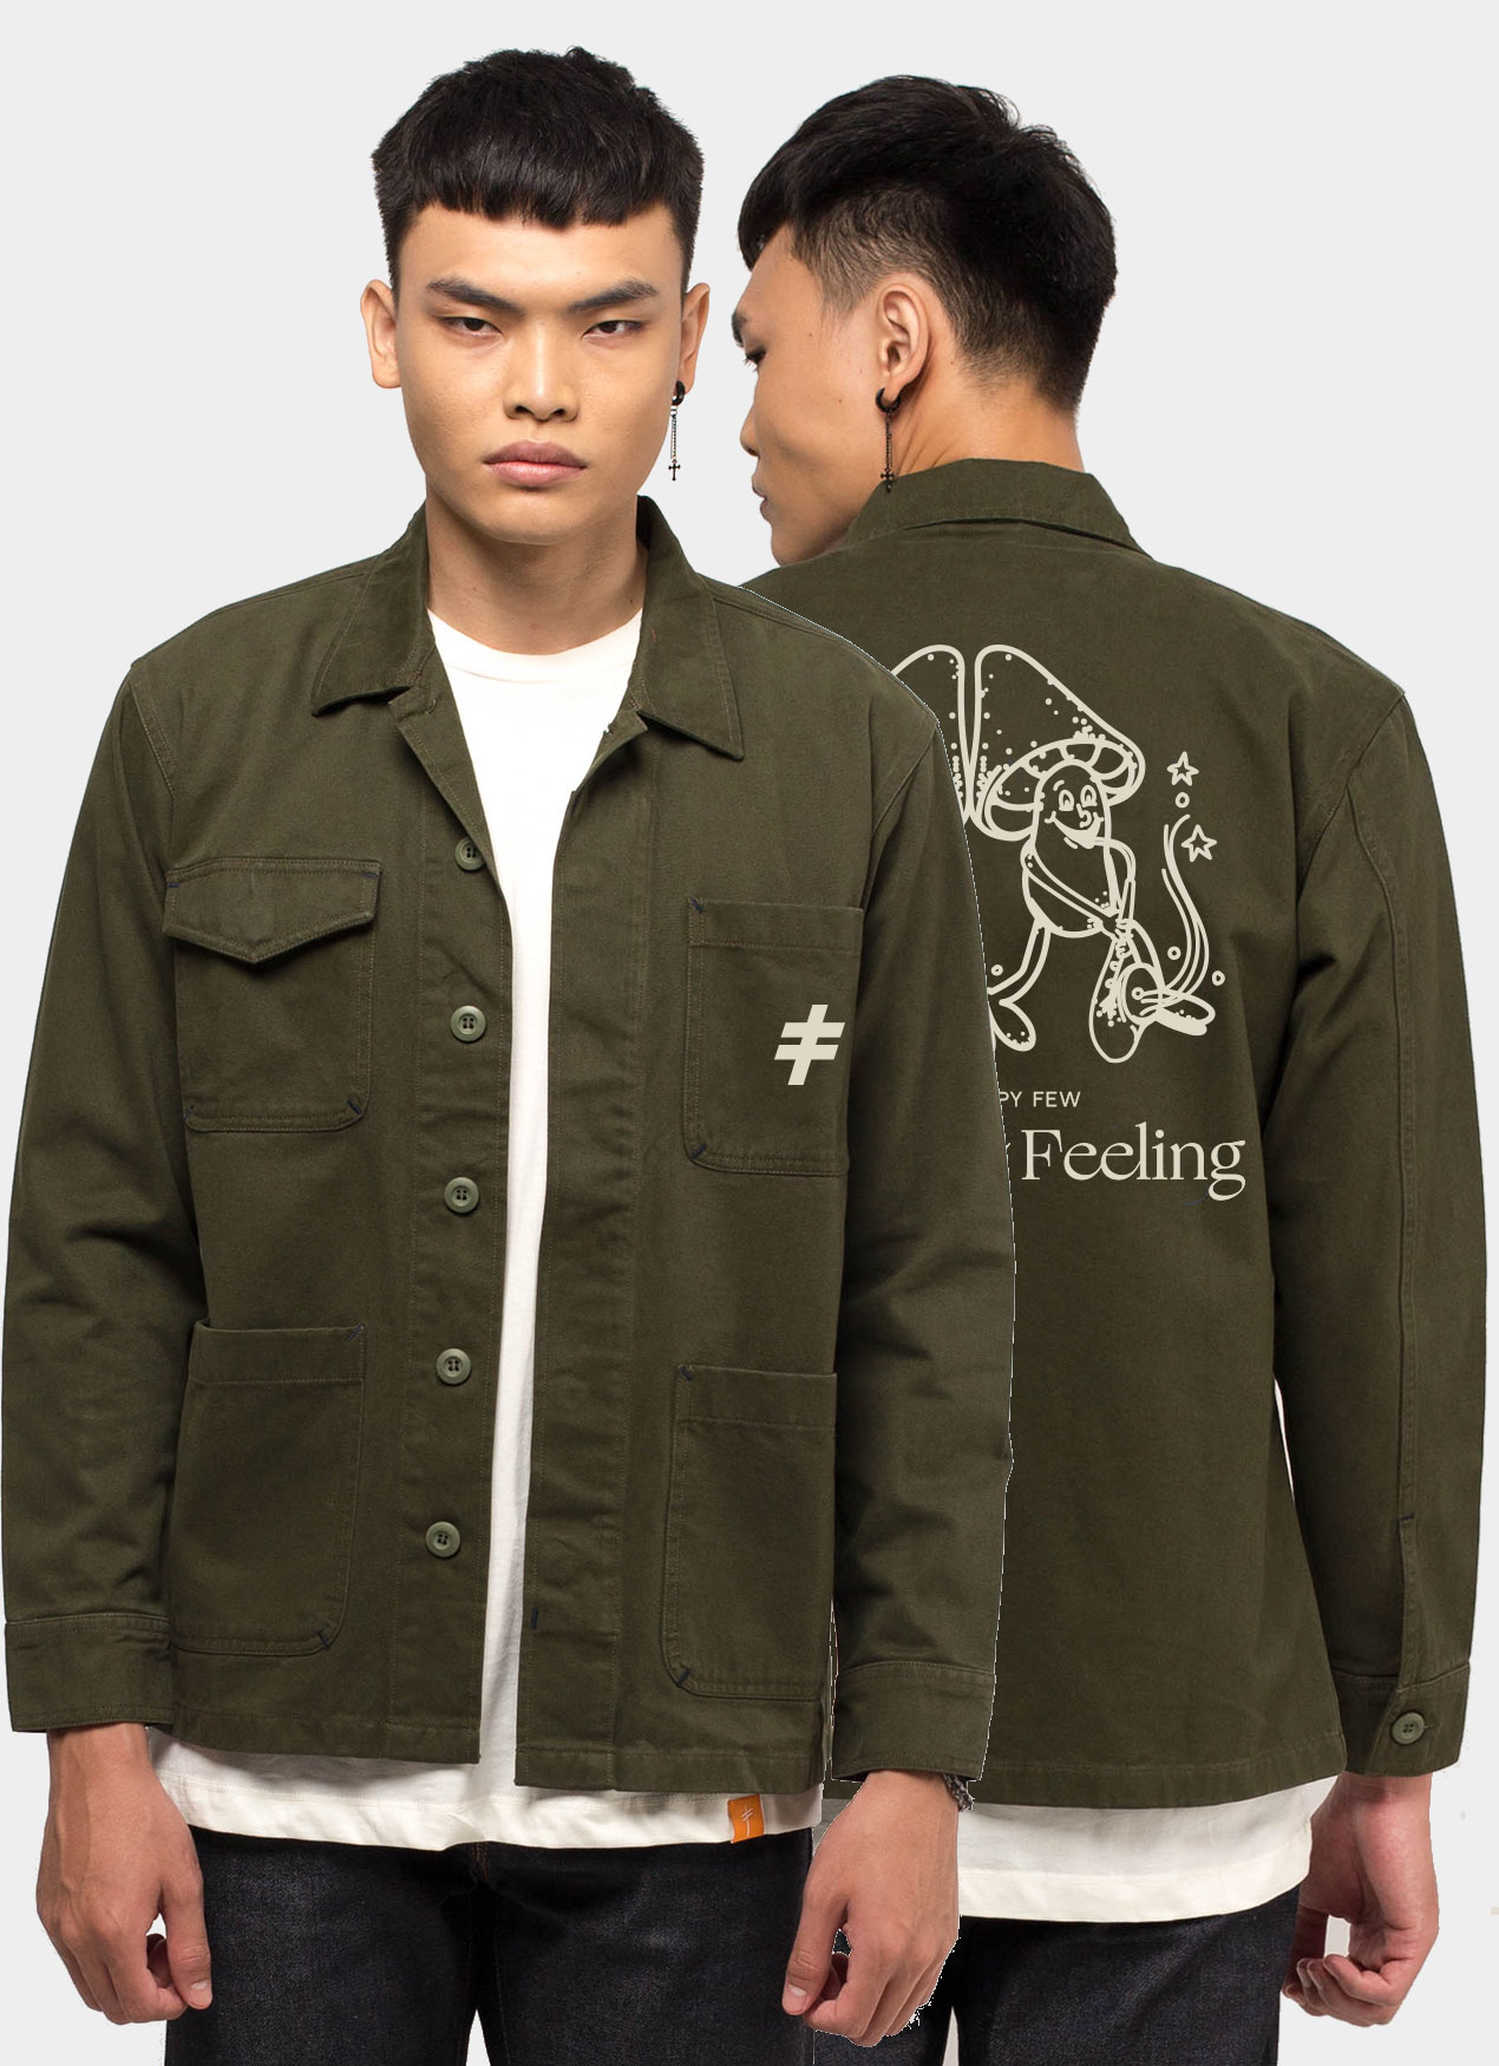 https://heymonstore.com/files/uploads/product-images/big/home-chore-jacket-army-green_r_05-03-21-16-06-45_home-chore-jacket-army-green-1.jpg